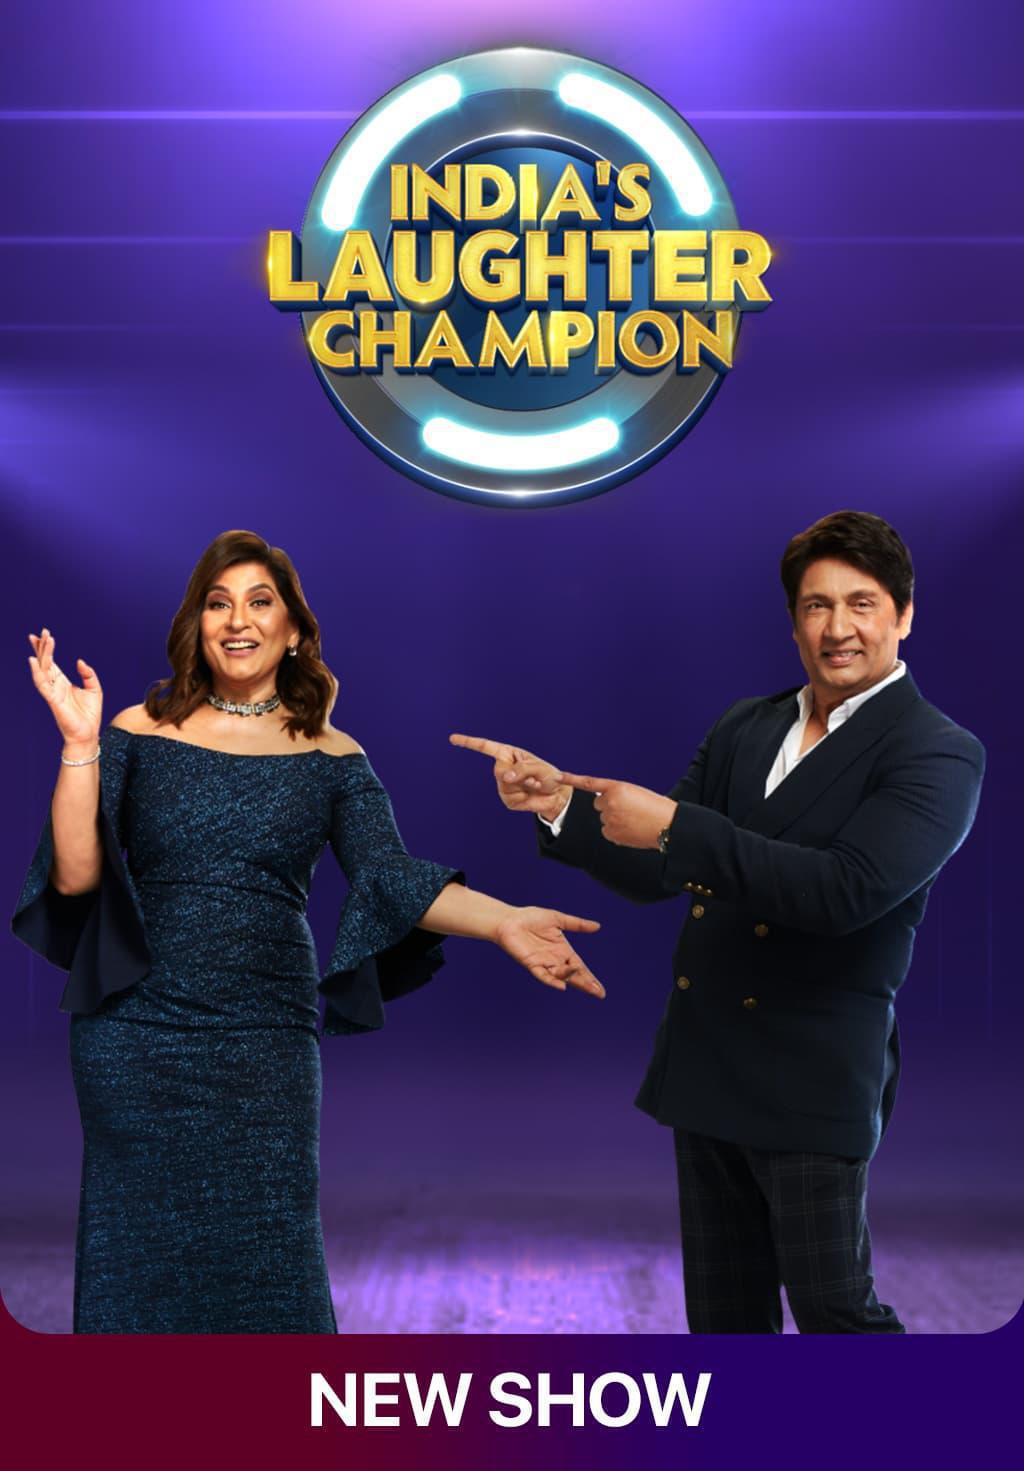 TV ratings for India’s Laughter Champion in South Africa. Sony TV series